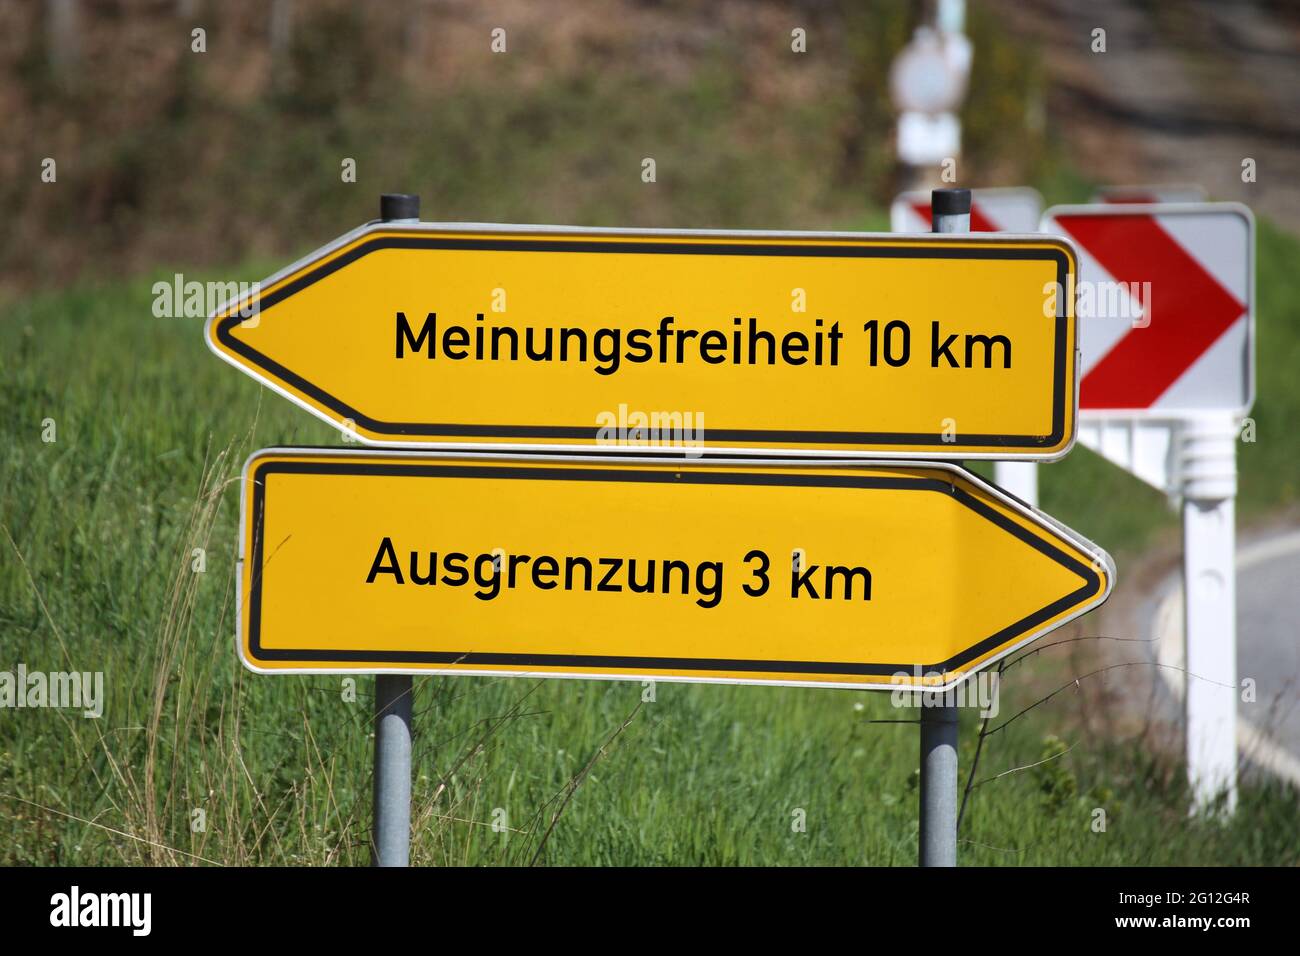 Symbol image on the topic of freedom of expression, Germany. Signposts show the options freedom of expression and exclusion. Stock Photo